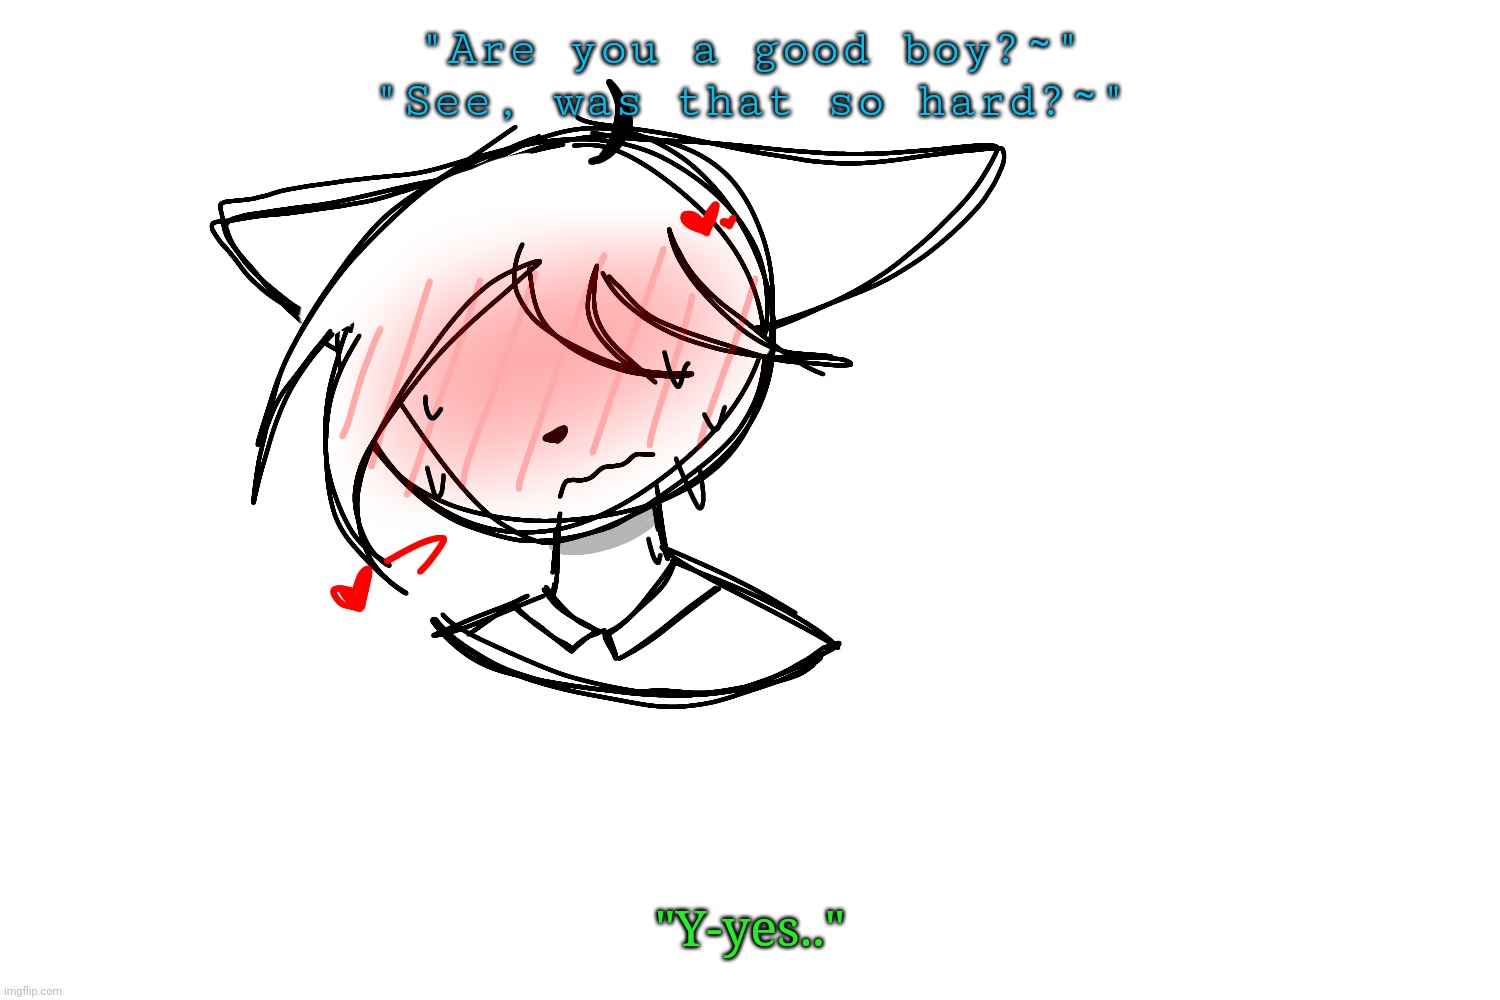 Highkey dying rn | "Are you a good boy?~"
"See, was that so hard?~"; "Y-yes.." | made w/ Imgflip meme maker